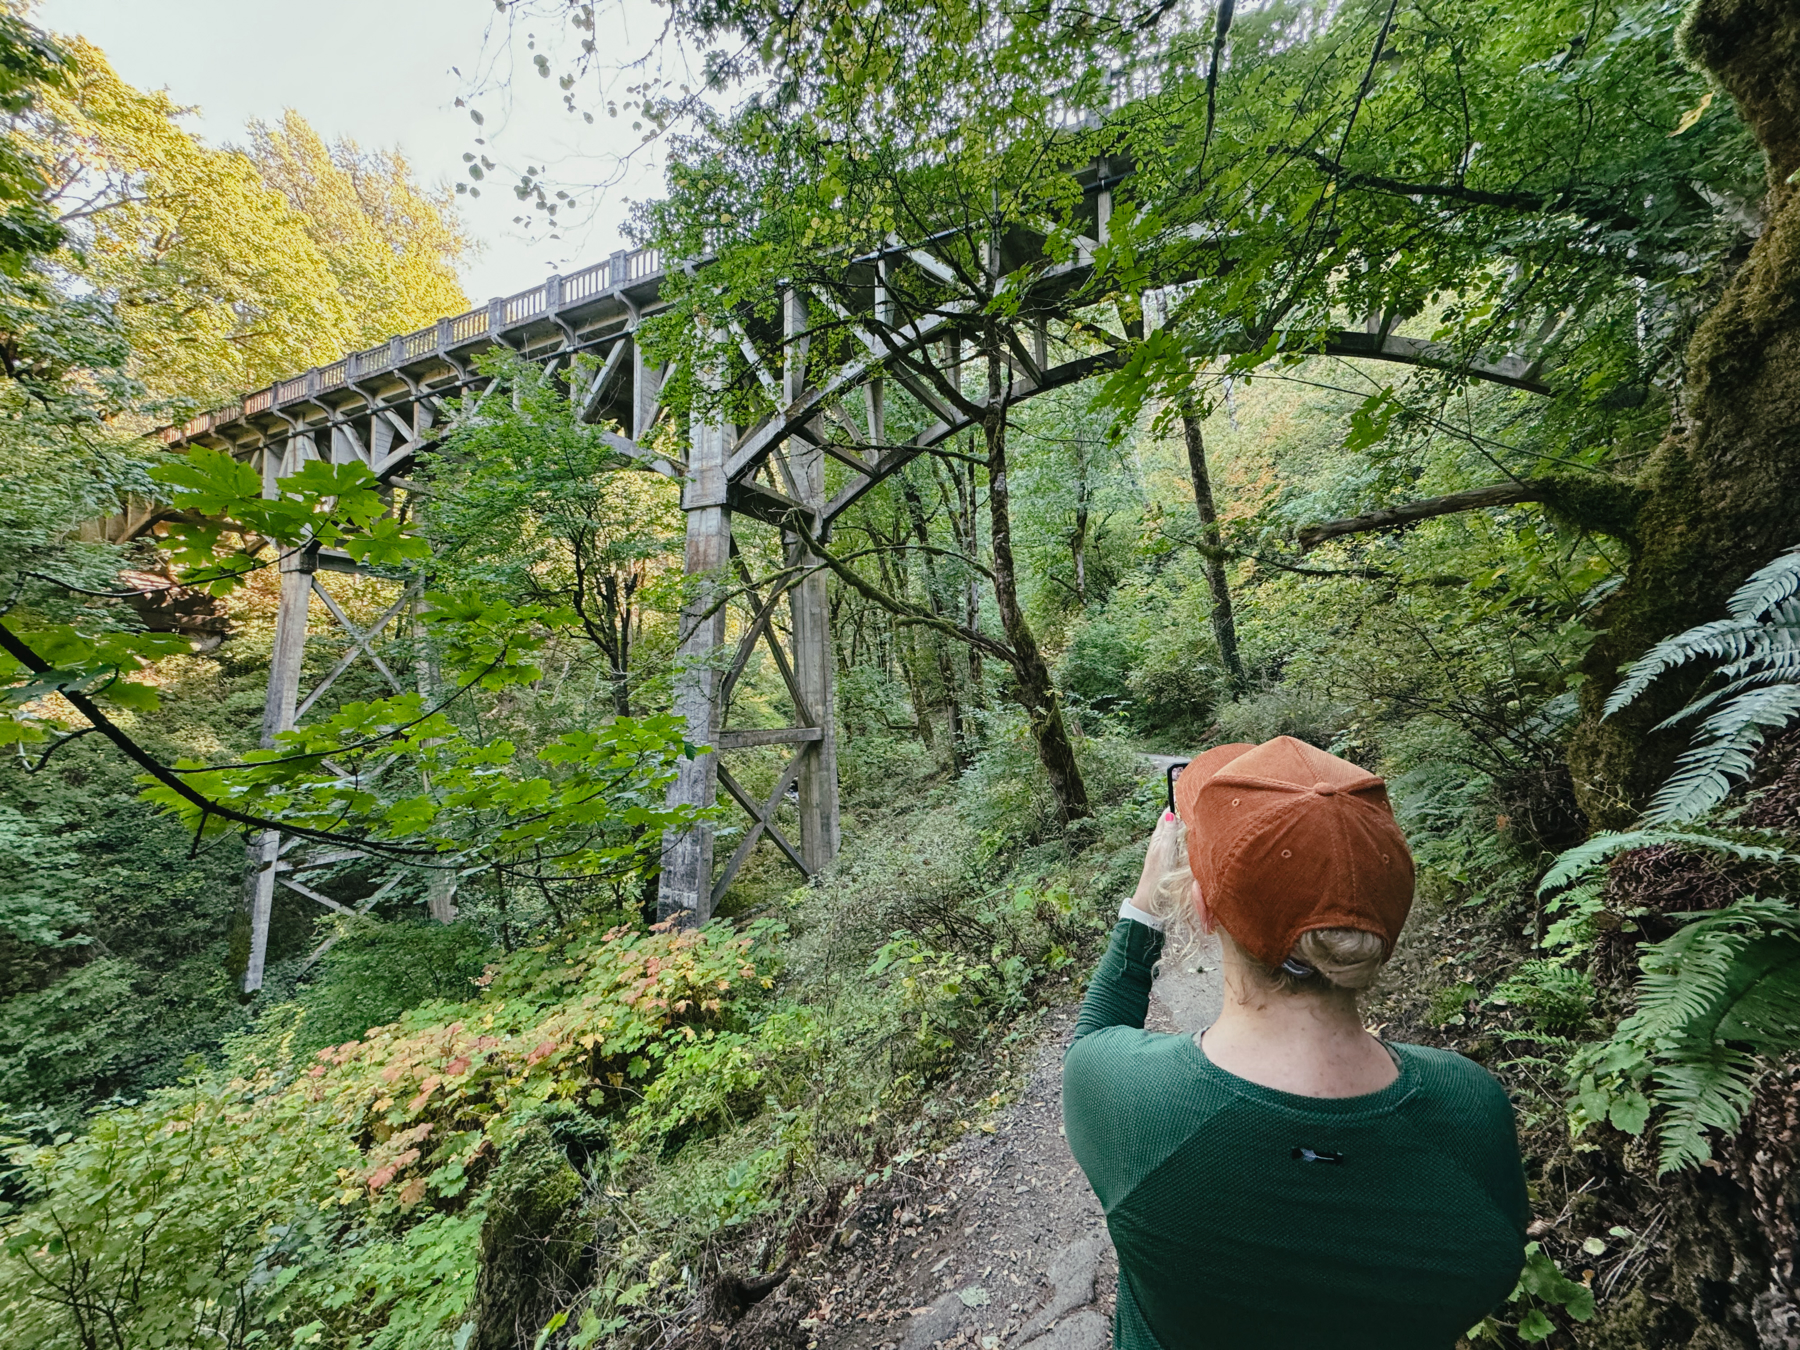 A woman on a hiking trail takes a picture of a bridge that goes over the trail.